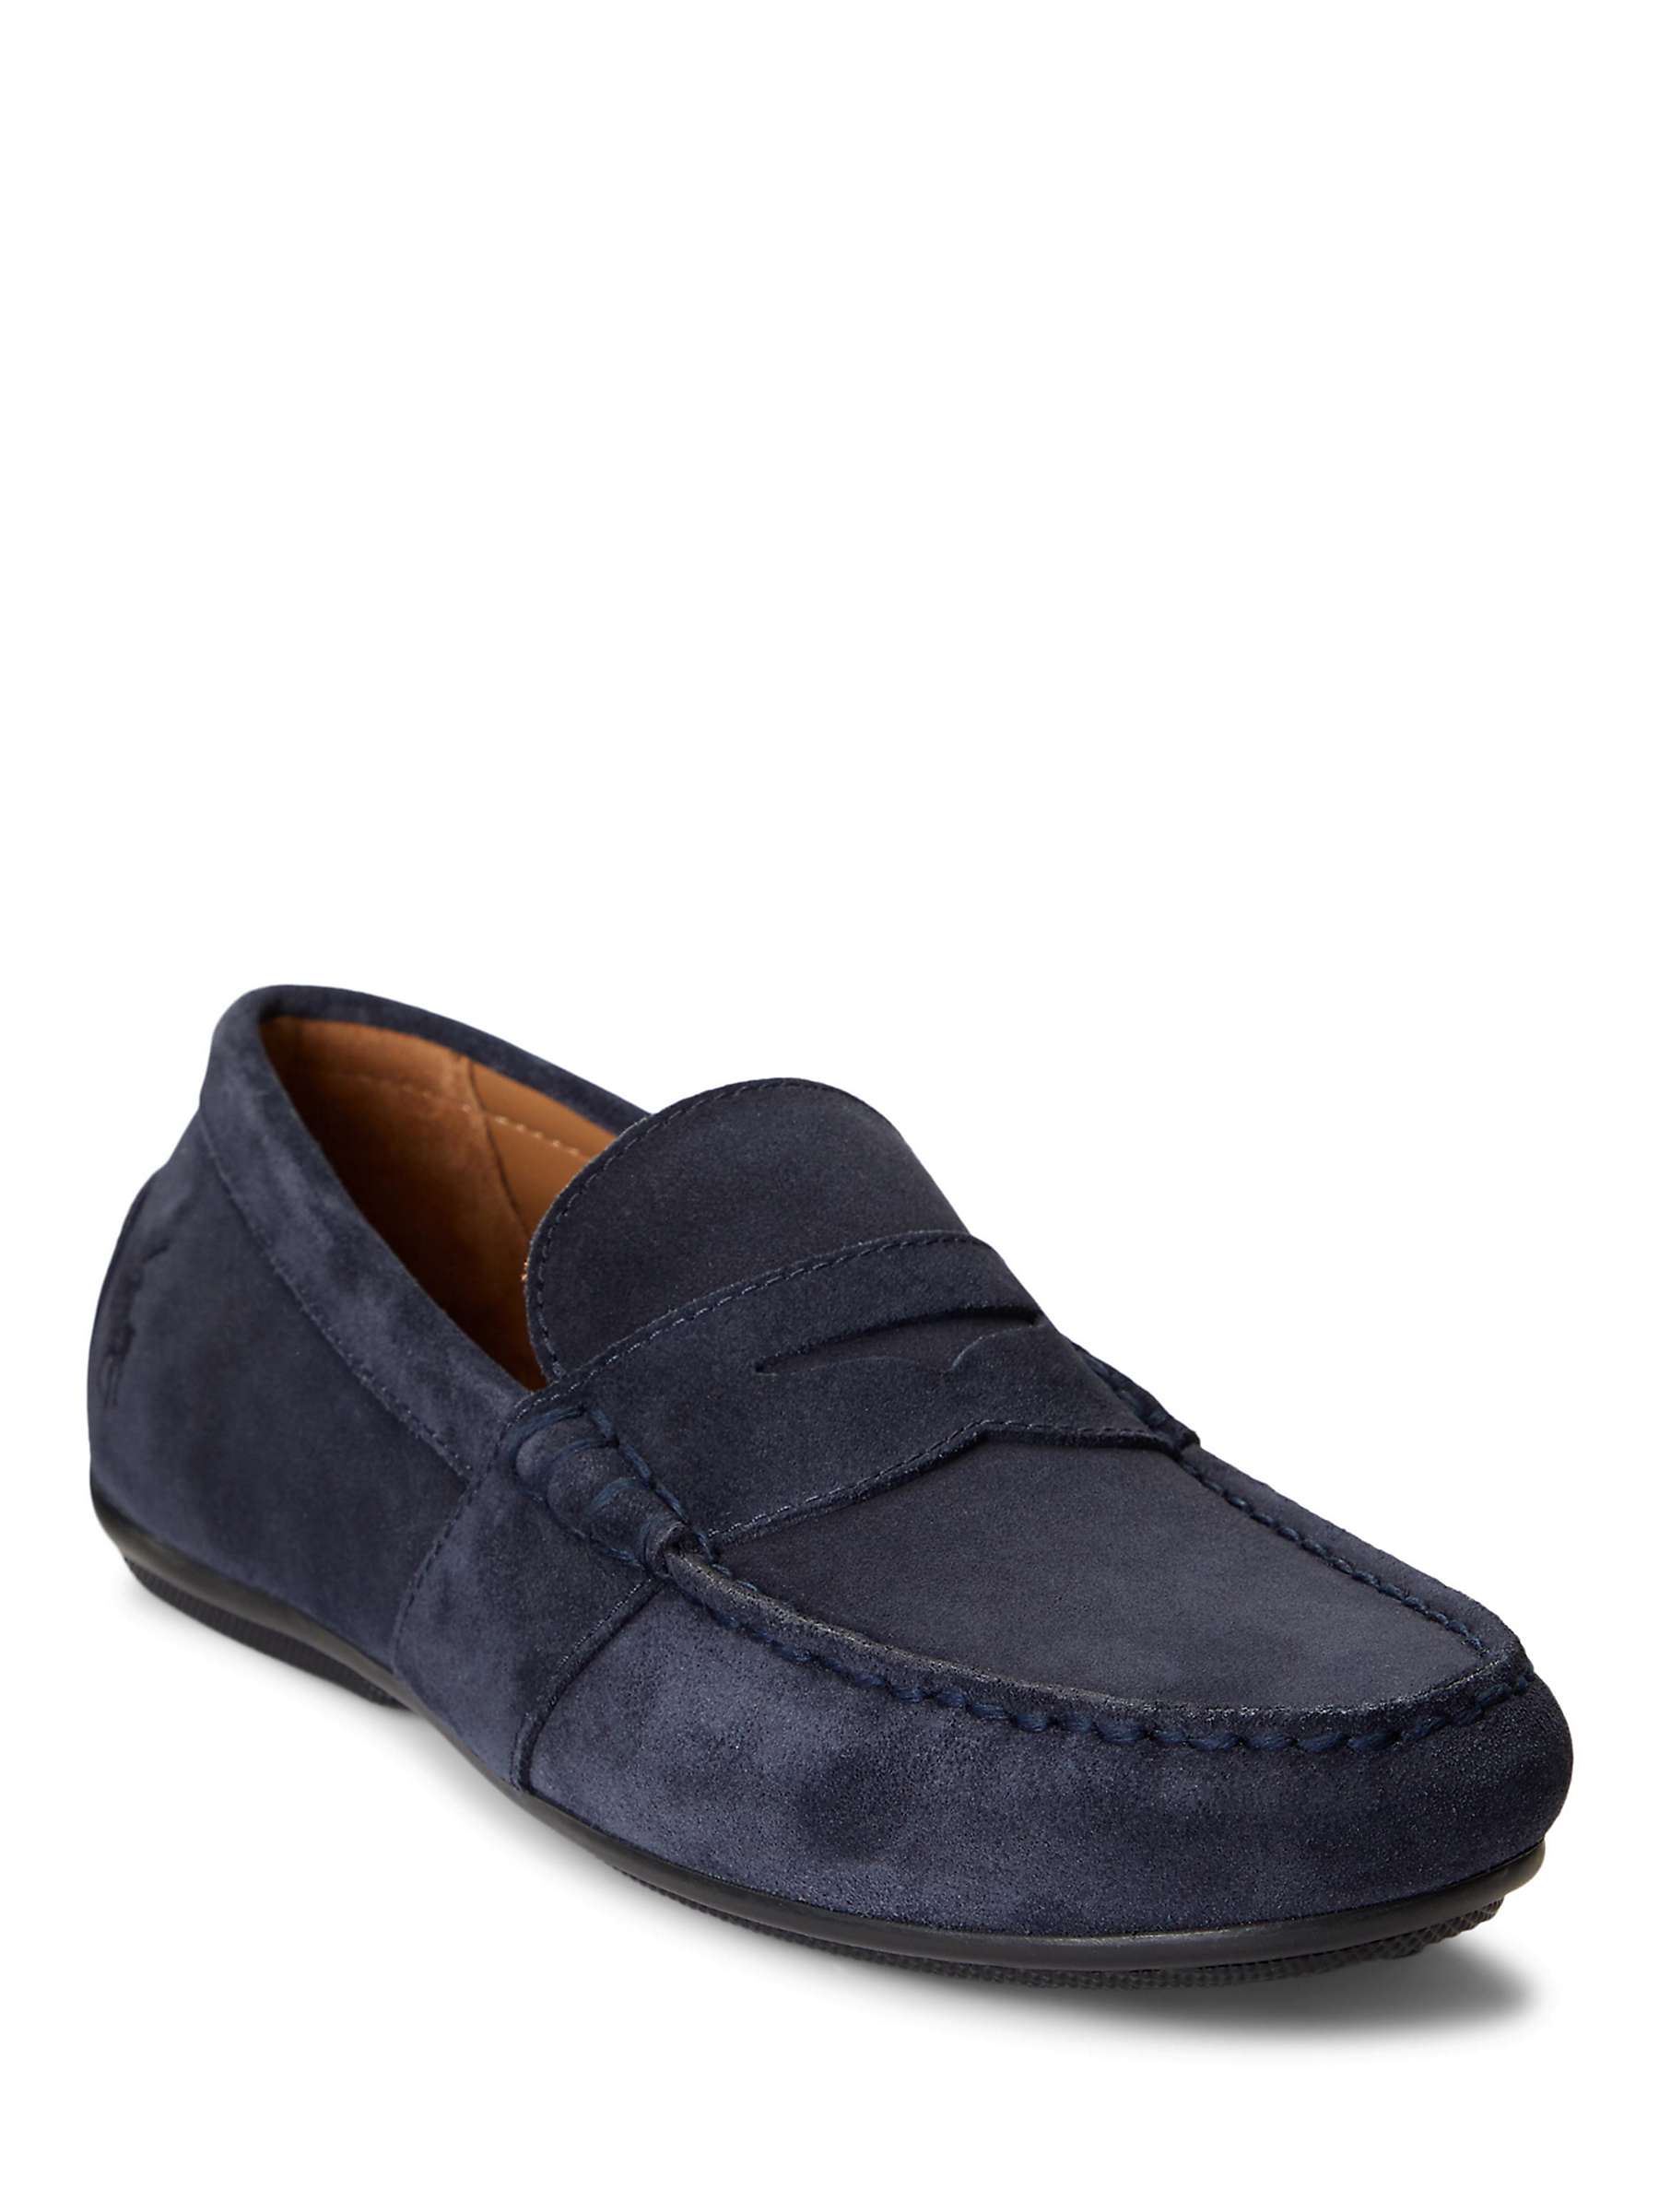 Ralph Lauren Reynold Suede Moccasin Loafers, Navy at John Lewis & Partners